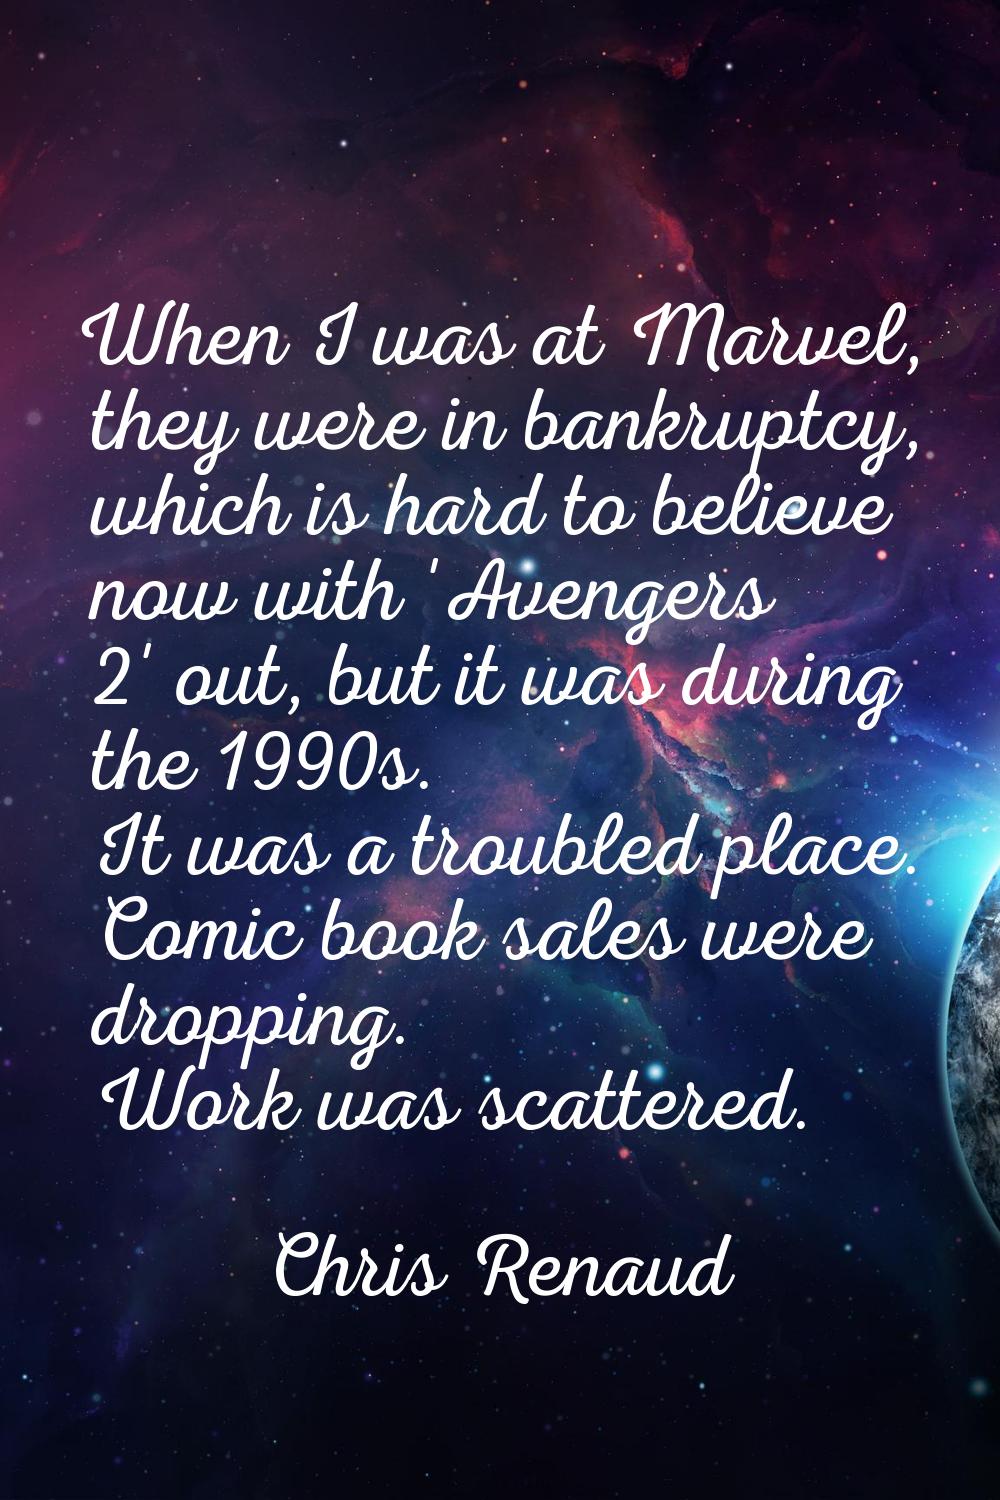 When I was at Marvel, they were in bankruptcy, which is hard to believe now with 'Avengers 2' out, 